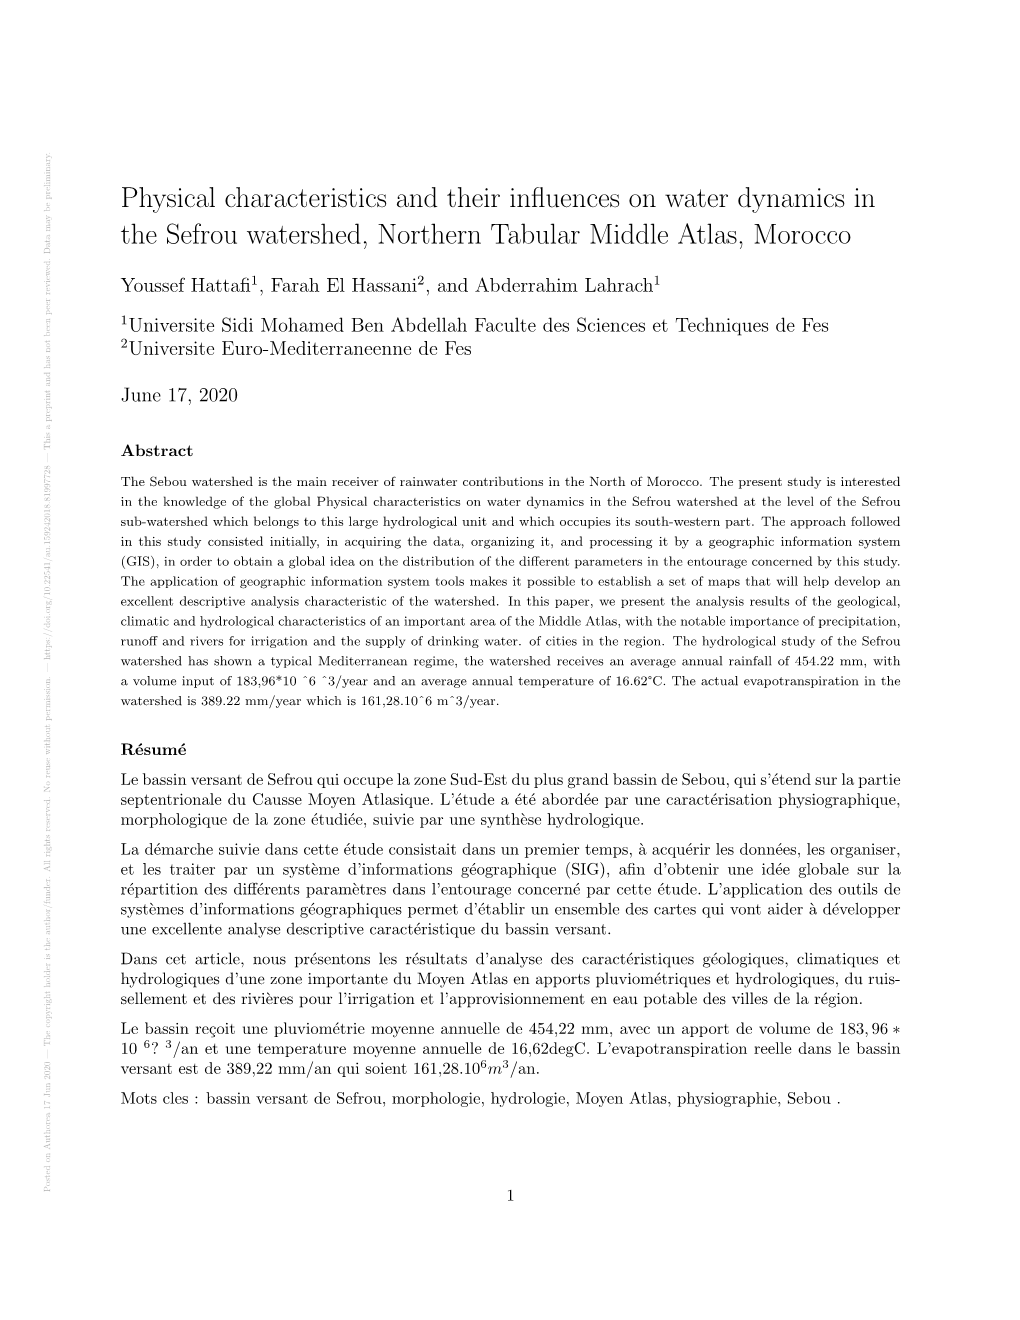 Physical Characteristics and Their Influences on Water Dynamics in The